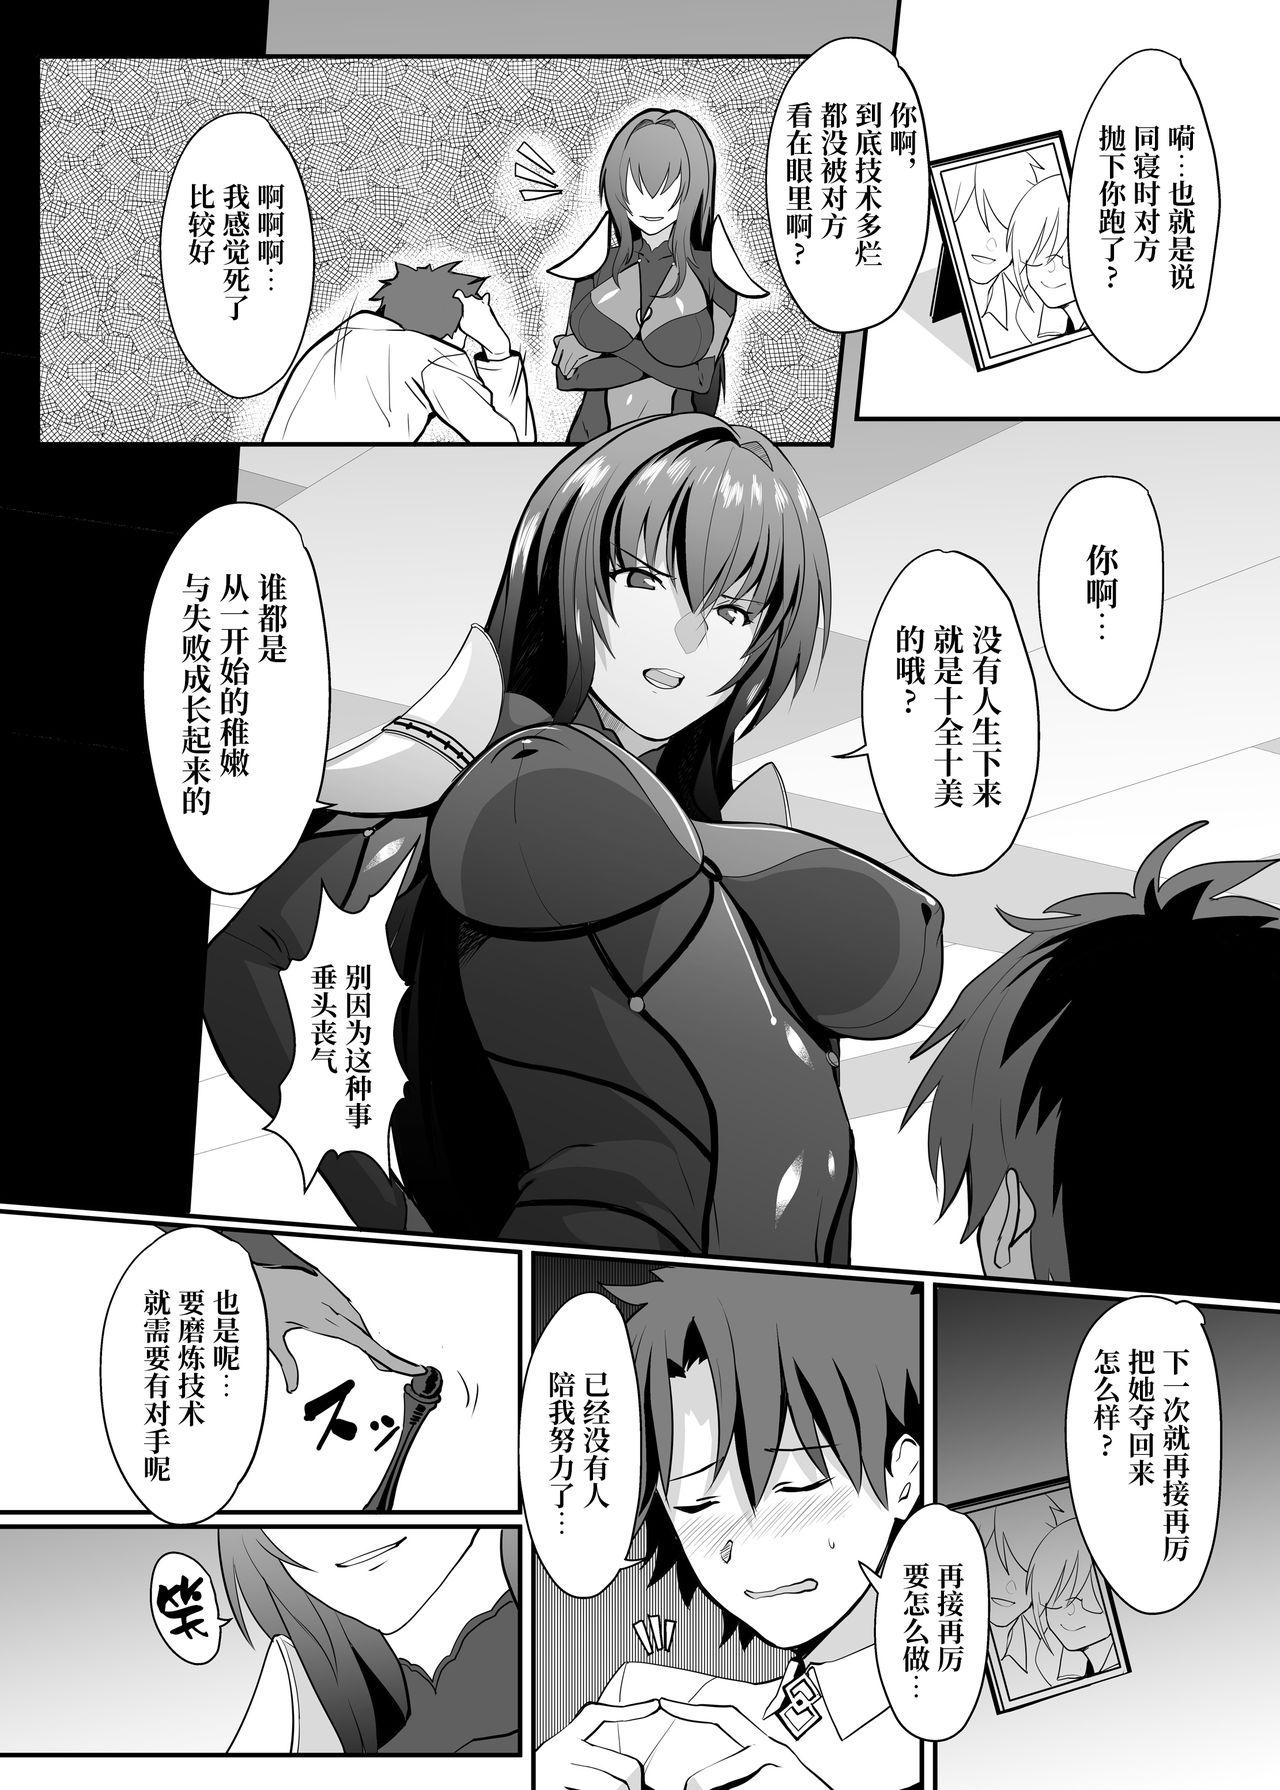 Tributo Scathach Shishou no Dosukebe Lesson - Fate grand order Dykes - Page 4